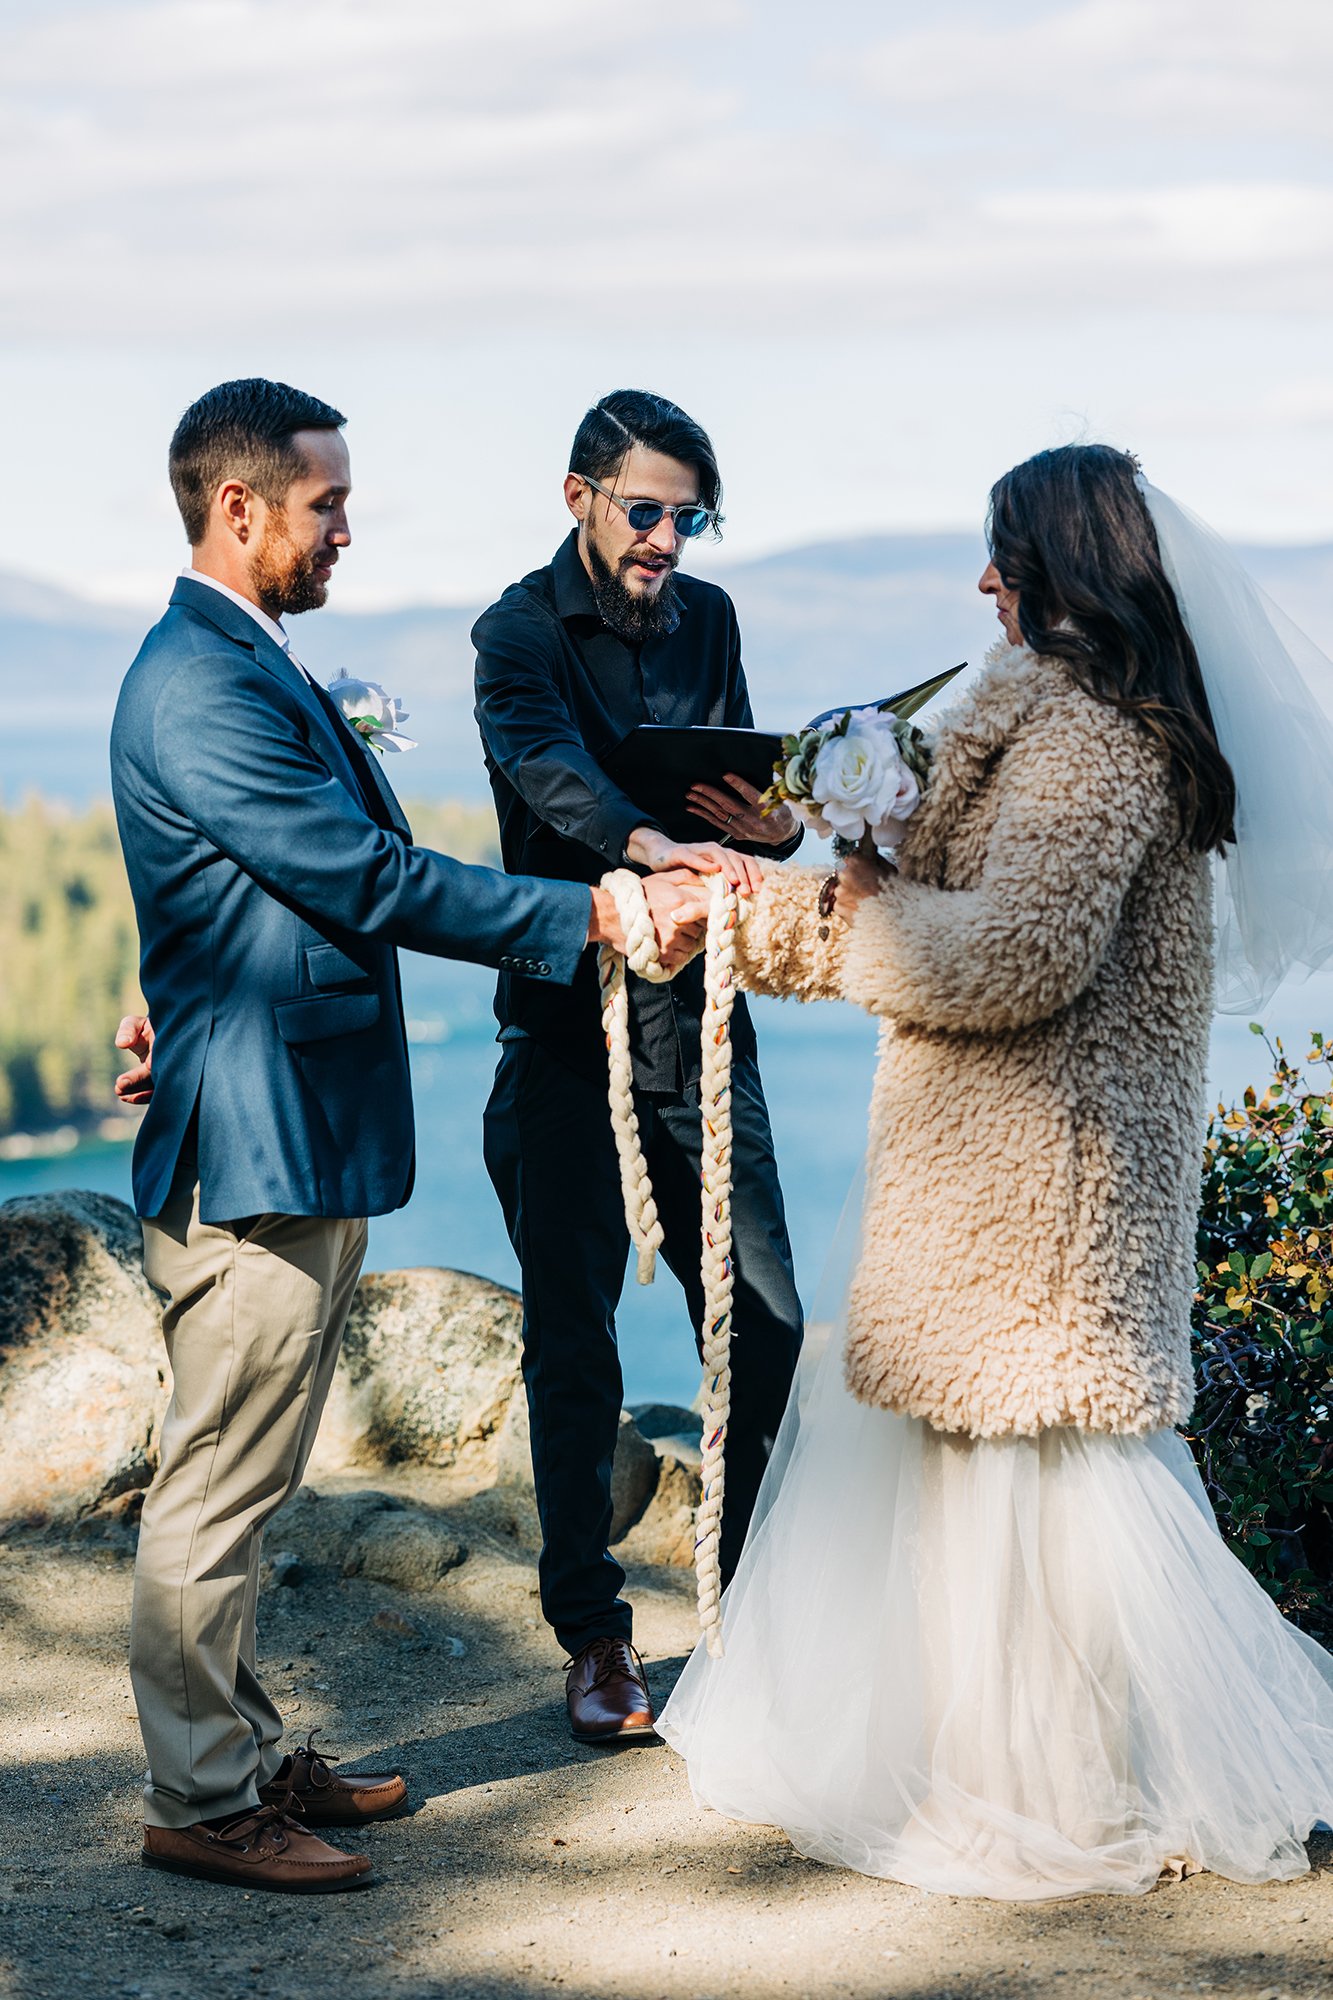 Caitlin and Keith enjoy their Tahoe wedding as officiant Isiah performs as handfasting.